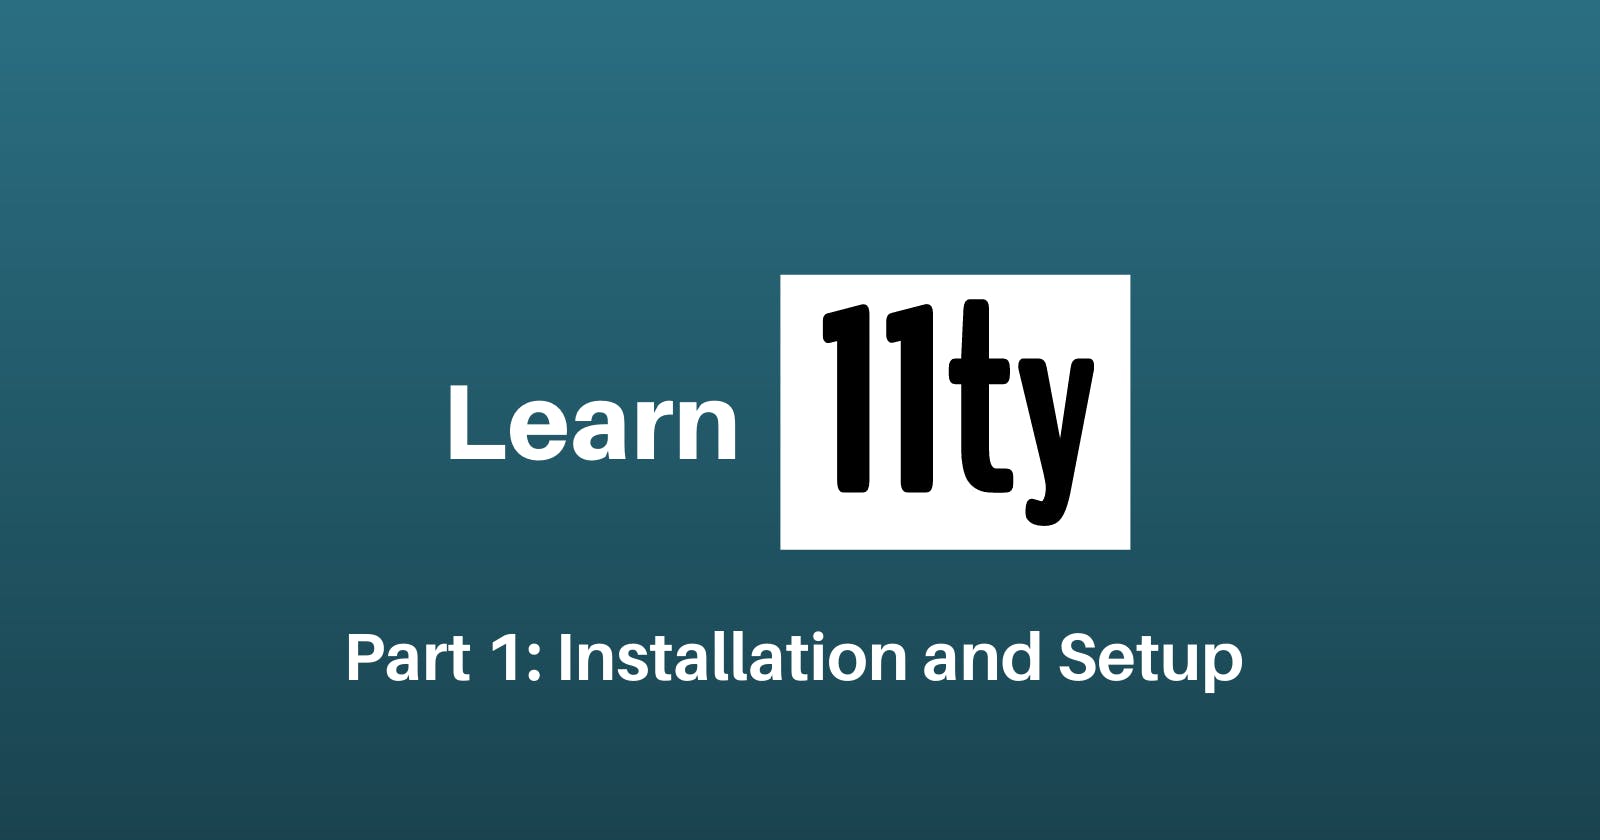 Let's Learn 11ty Part 1